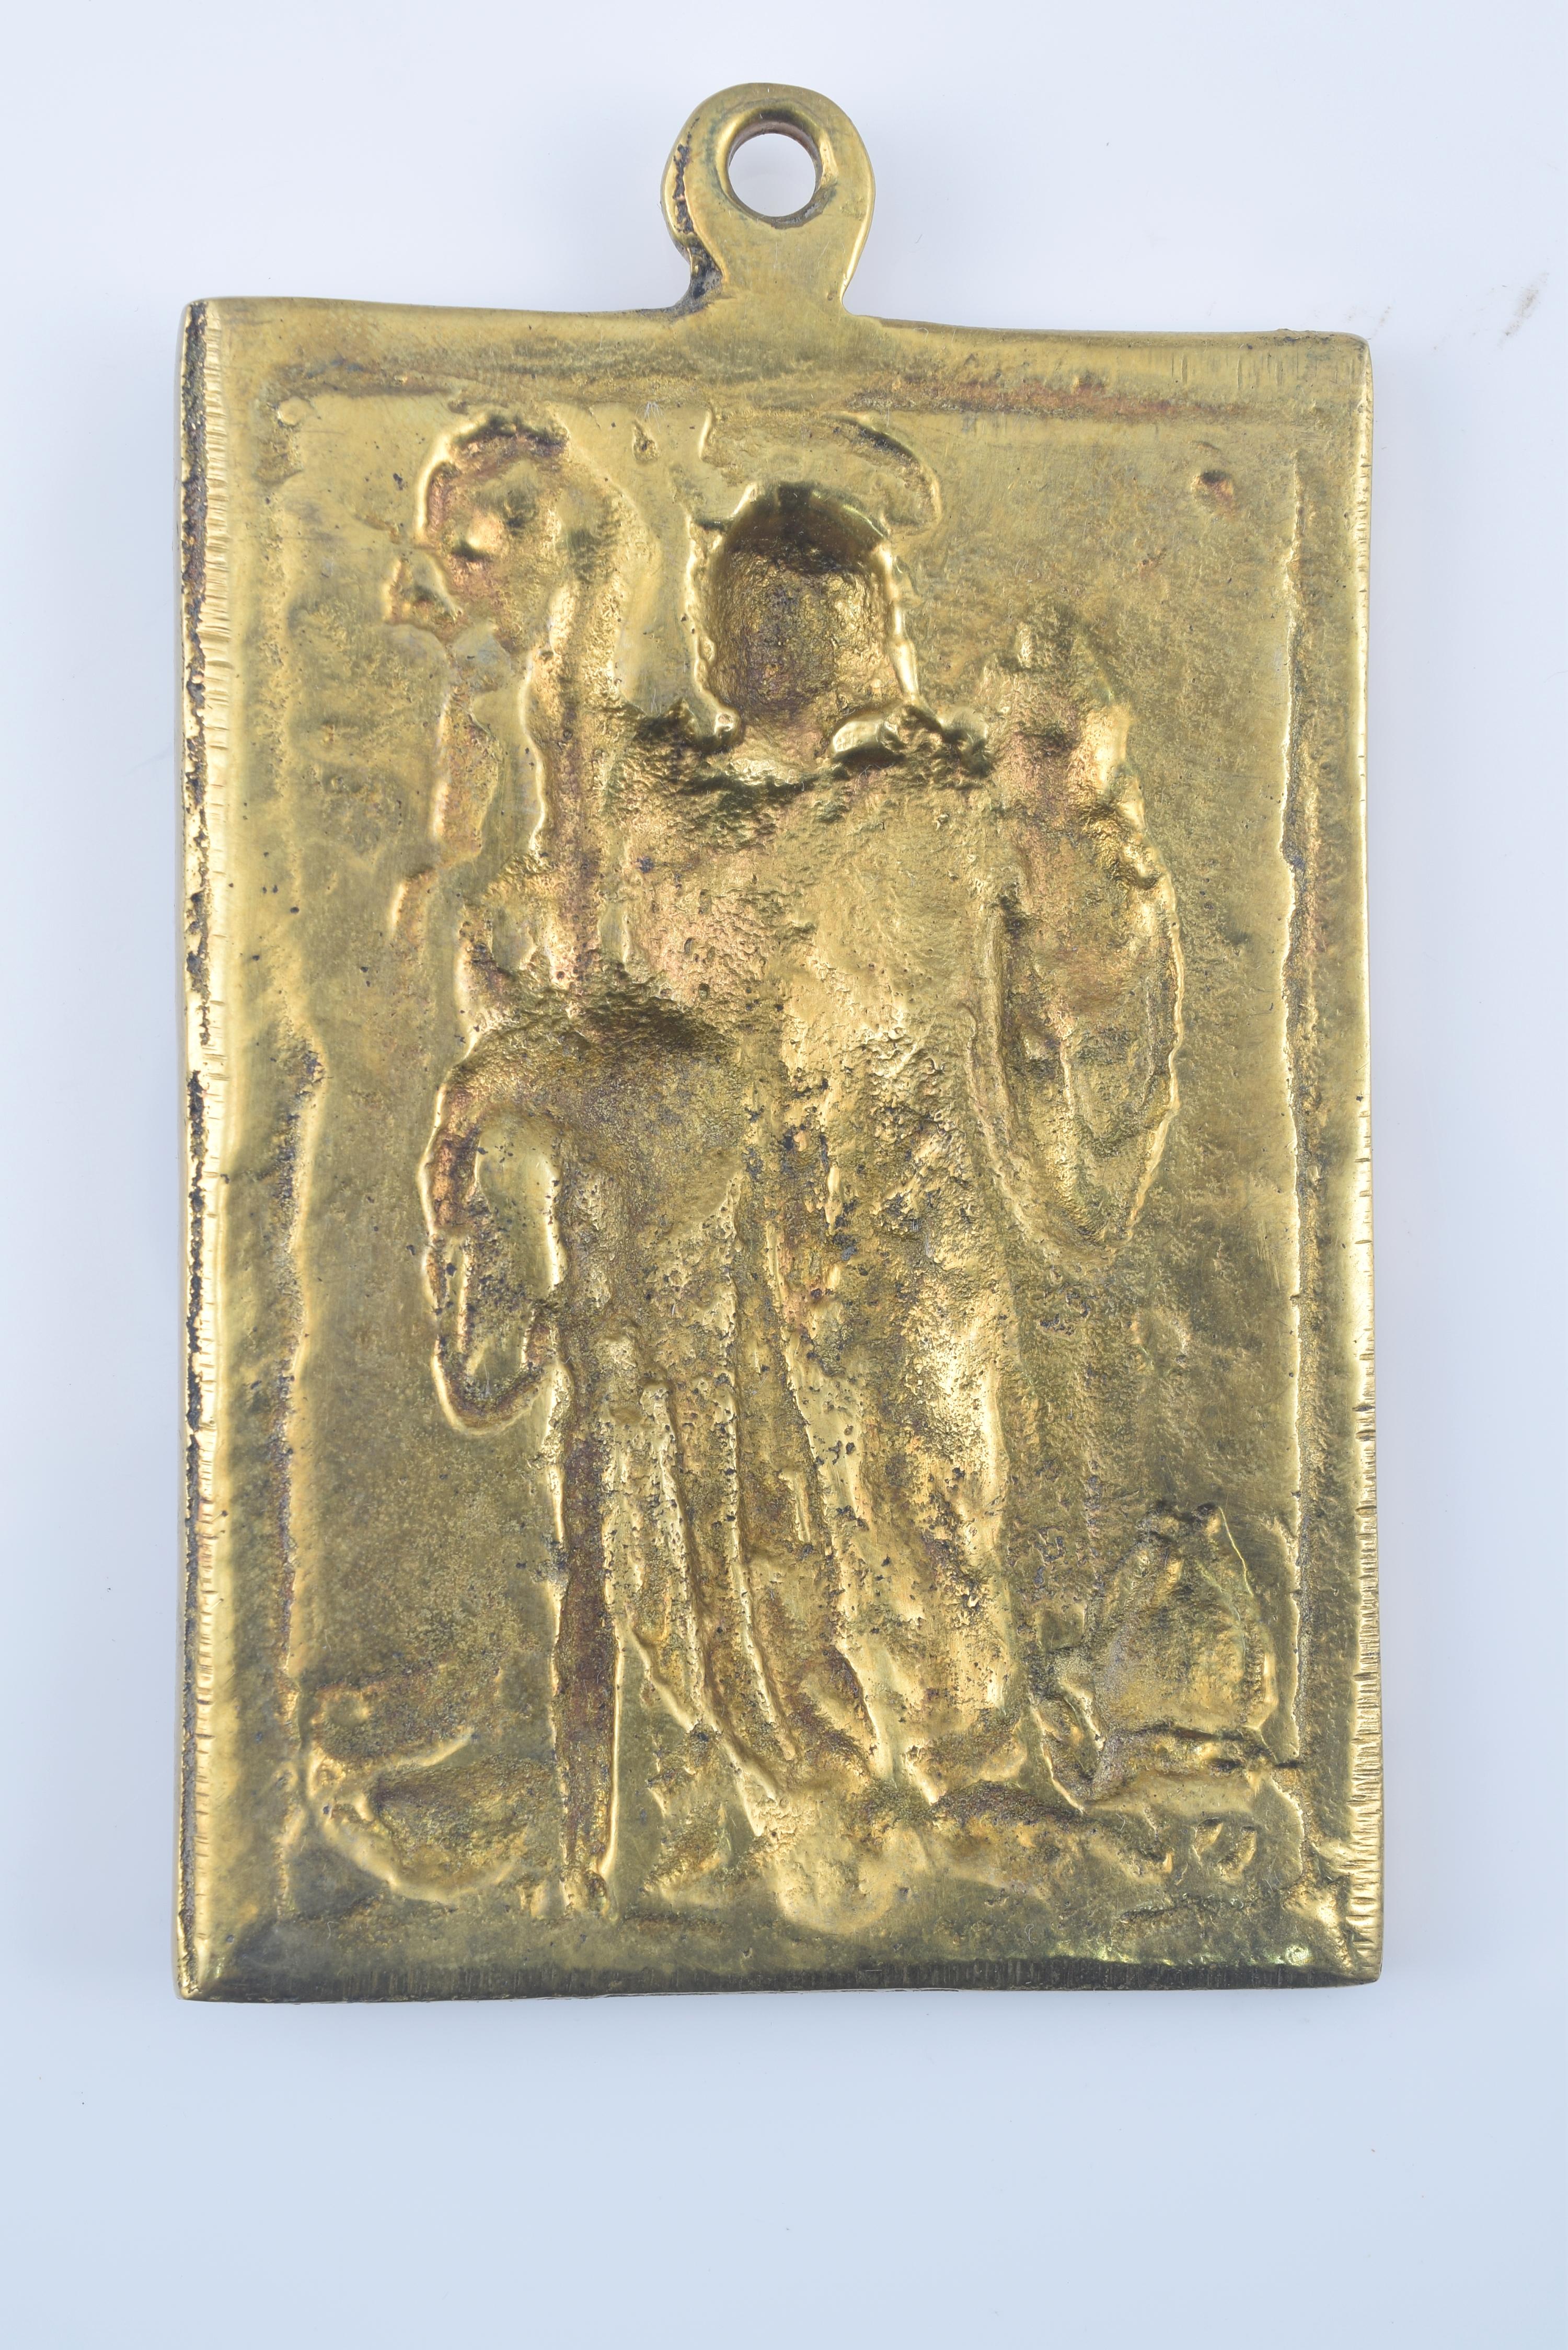 Devotional plaque, Holy Bishop. Bronze. Spanish school, 19th century. 
Rectangular devotional plate with a ring at the top and smooth moldings enhancing a figurative relief. You can see a male figure with a halo, carrying a bishop's staff, and is